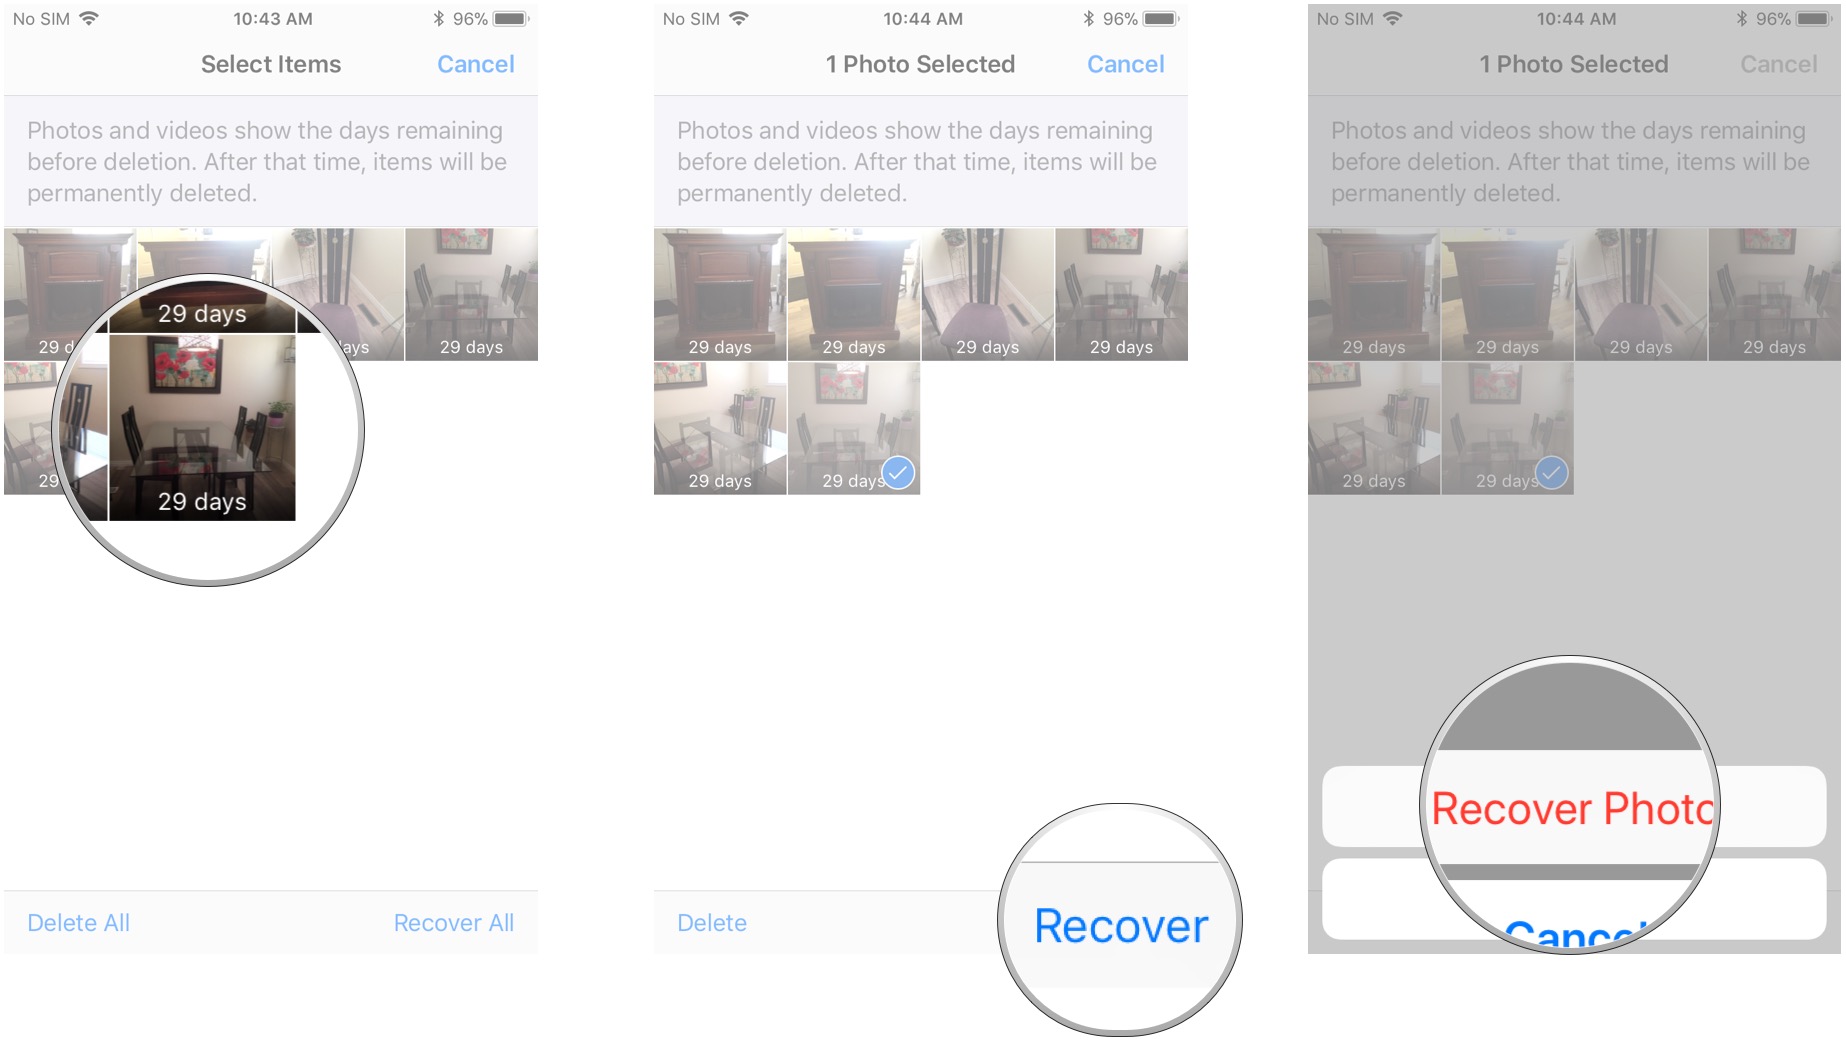 Tap the photos you want to recover, tap Recover, tap Recover Photos in the prompt